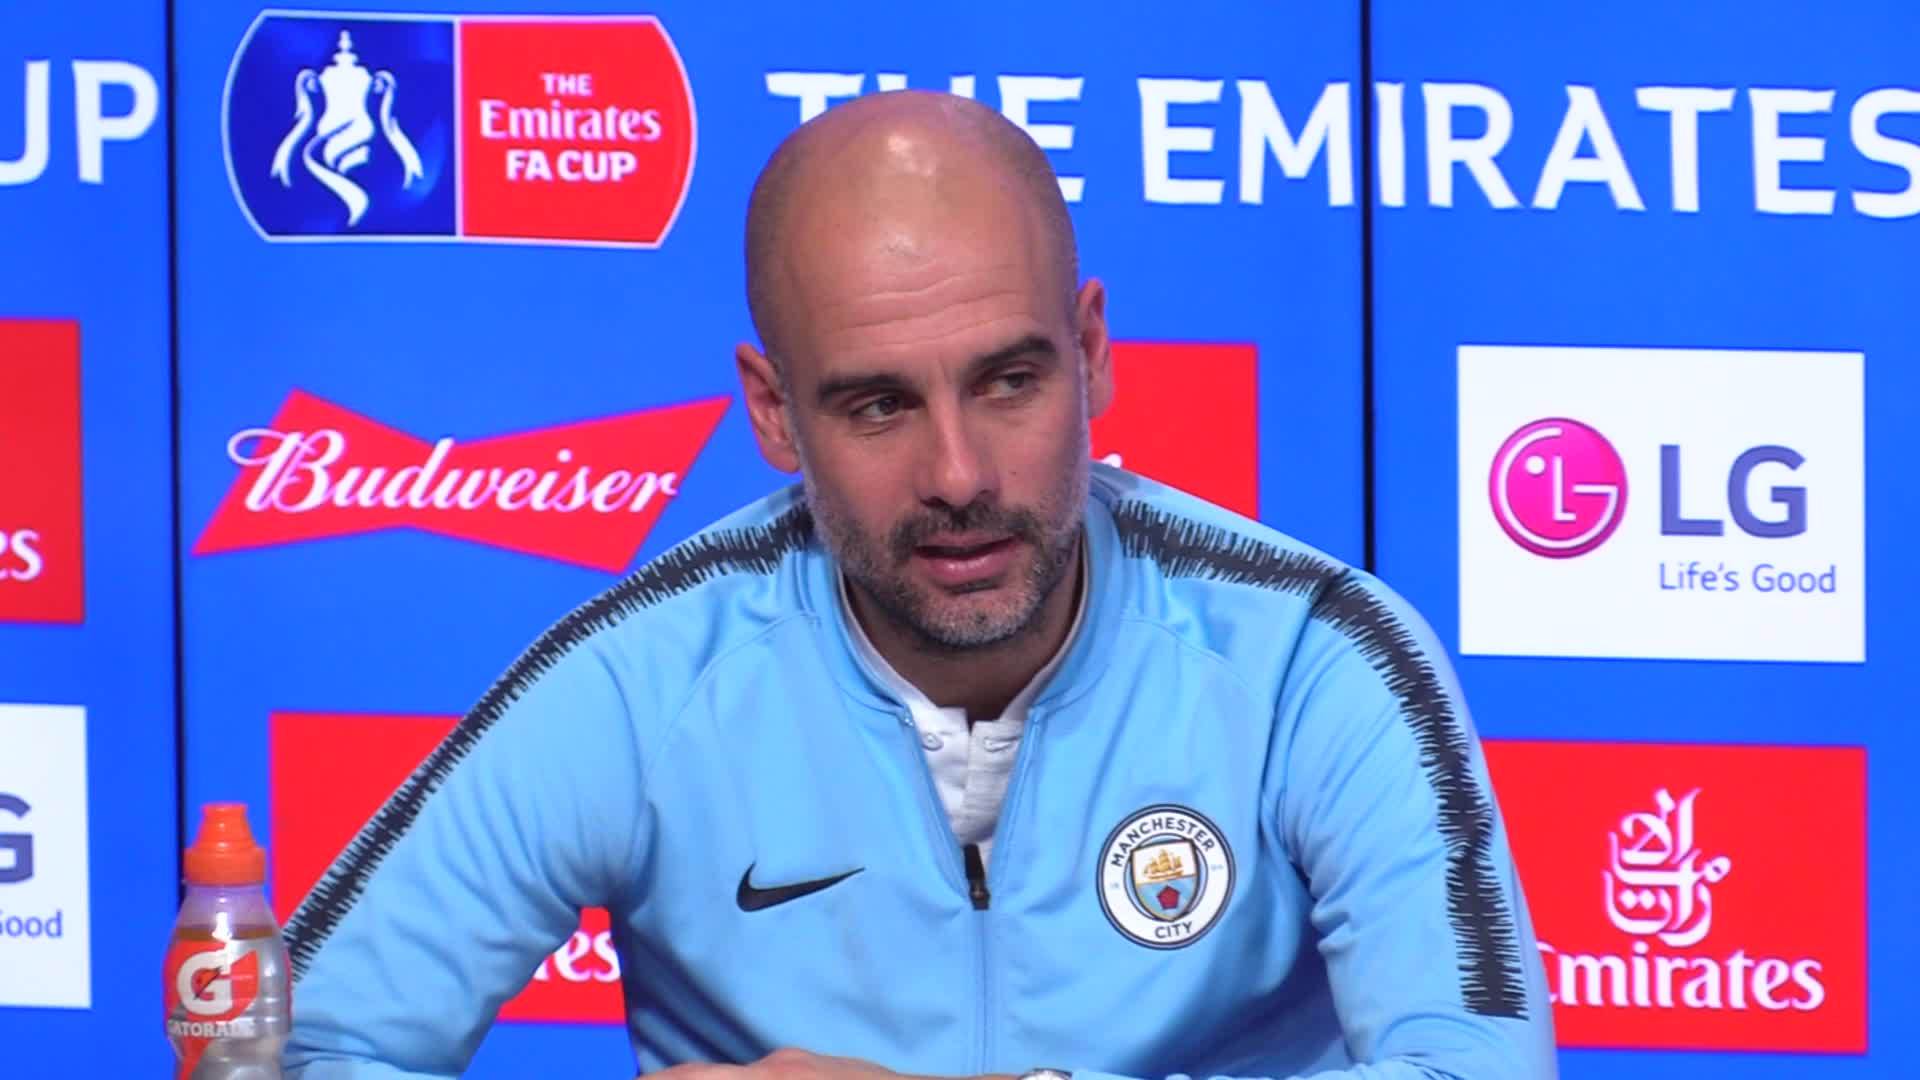 Video Loading - Pep Guardiola Fa Cup Press Conference , HD Wallpaper & Backgrounds